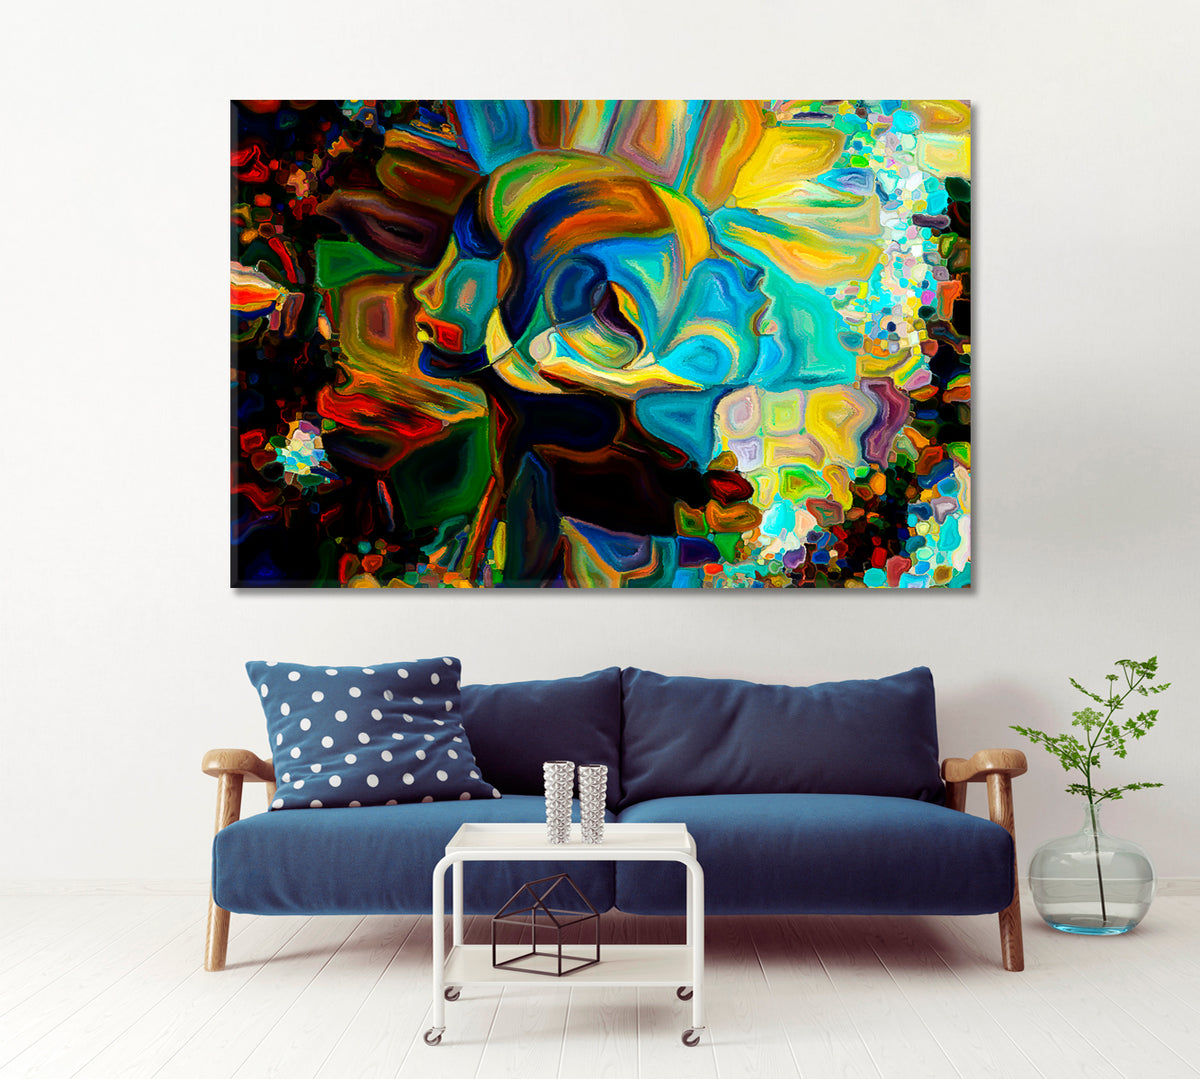 Peaceful Coexistence in Colors and Shapes Abstract Art Print Artesty 1 panel 24" x 16" 